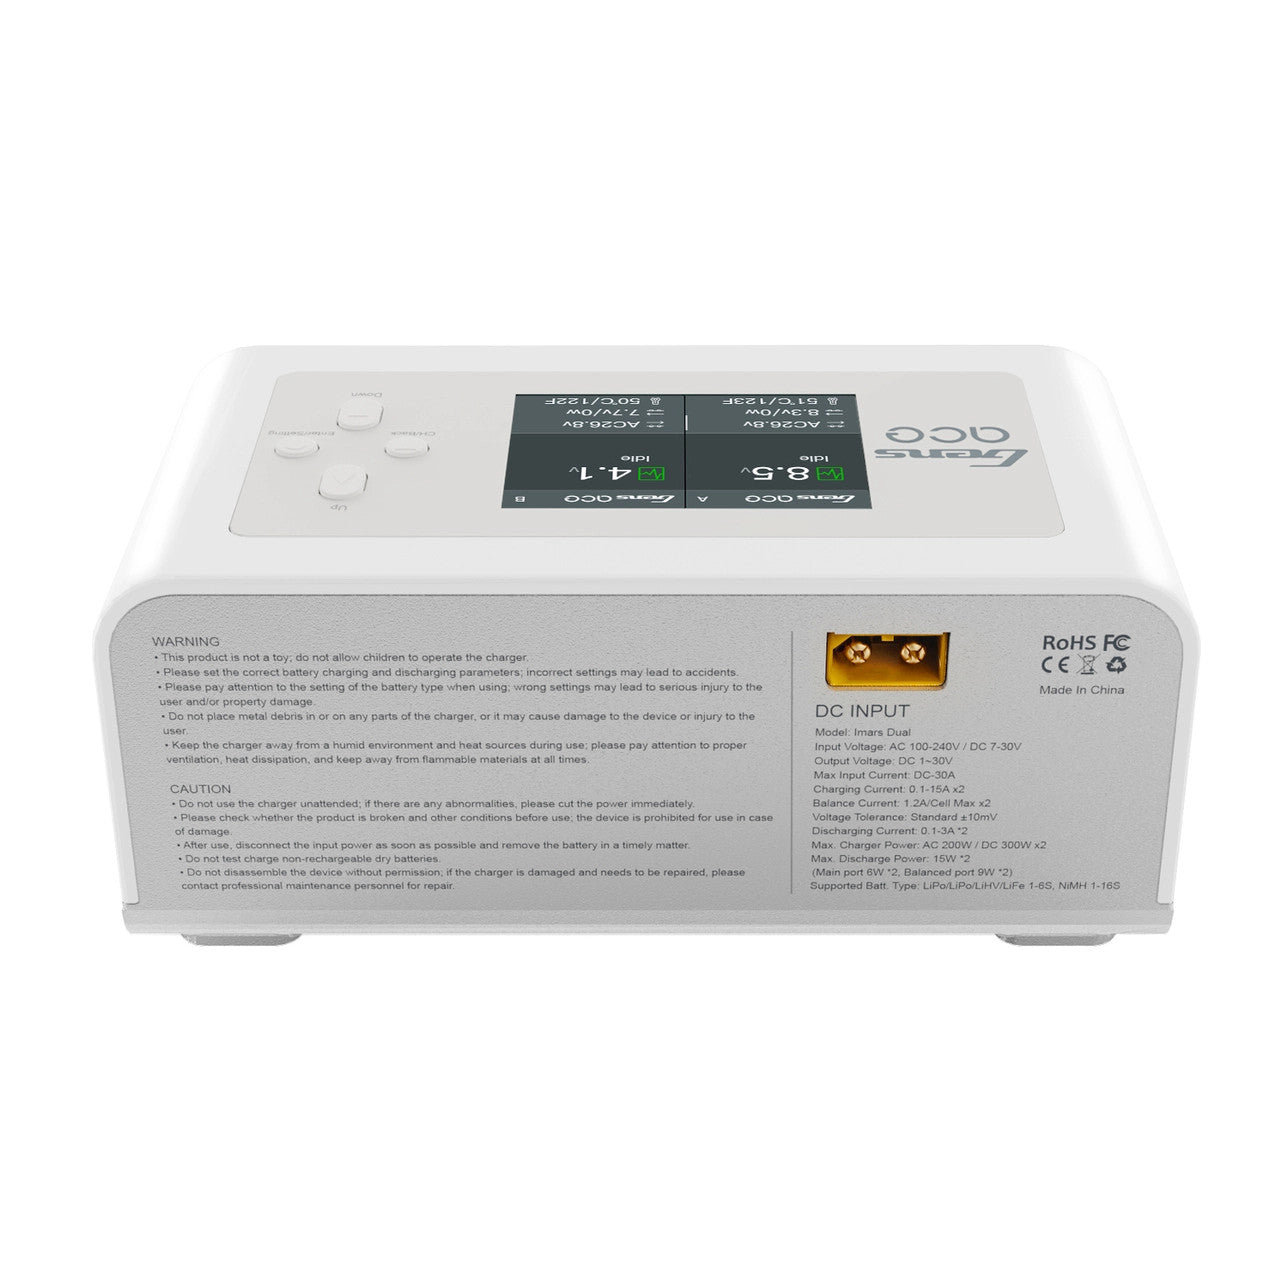 GensAce iMars Dual Port Charger (AC200W/DC600W) - White